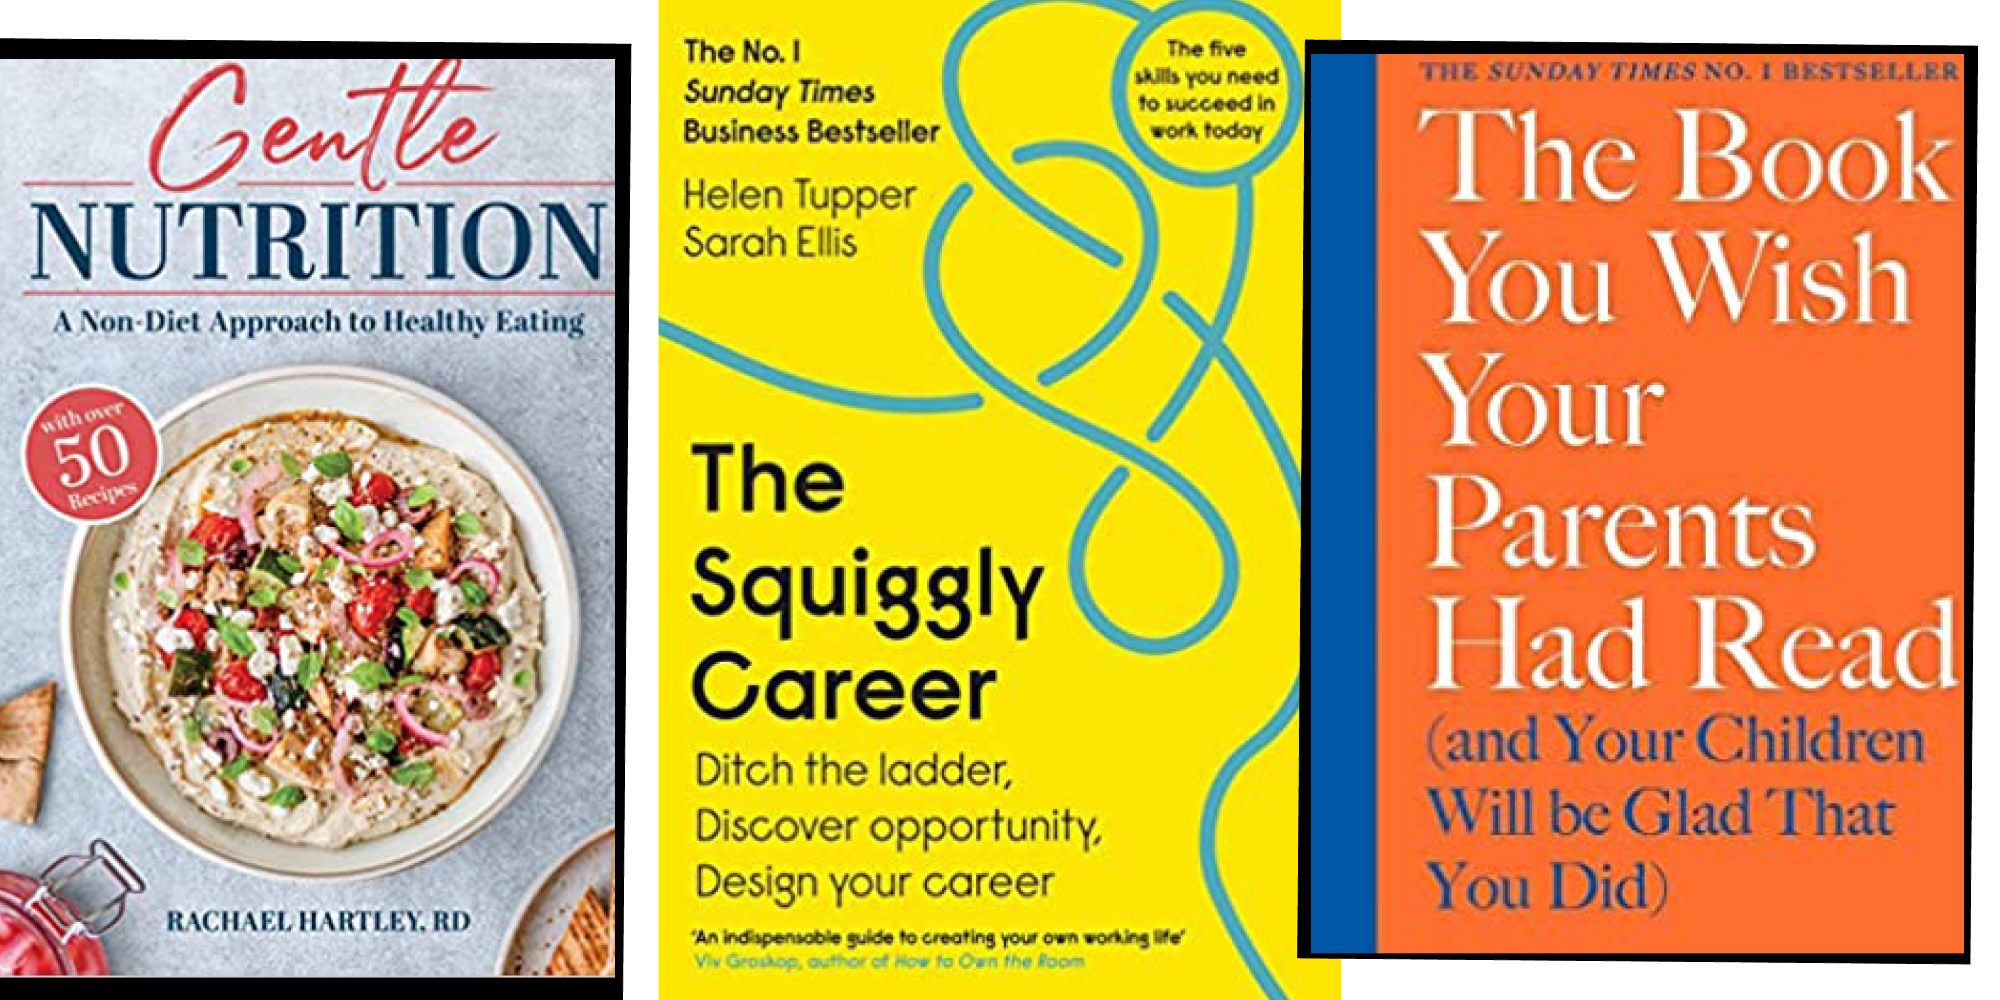 The Best Books for Self-Care